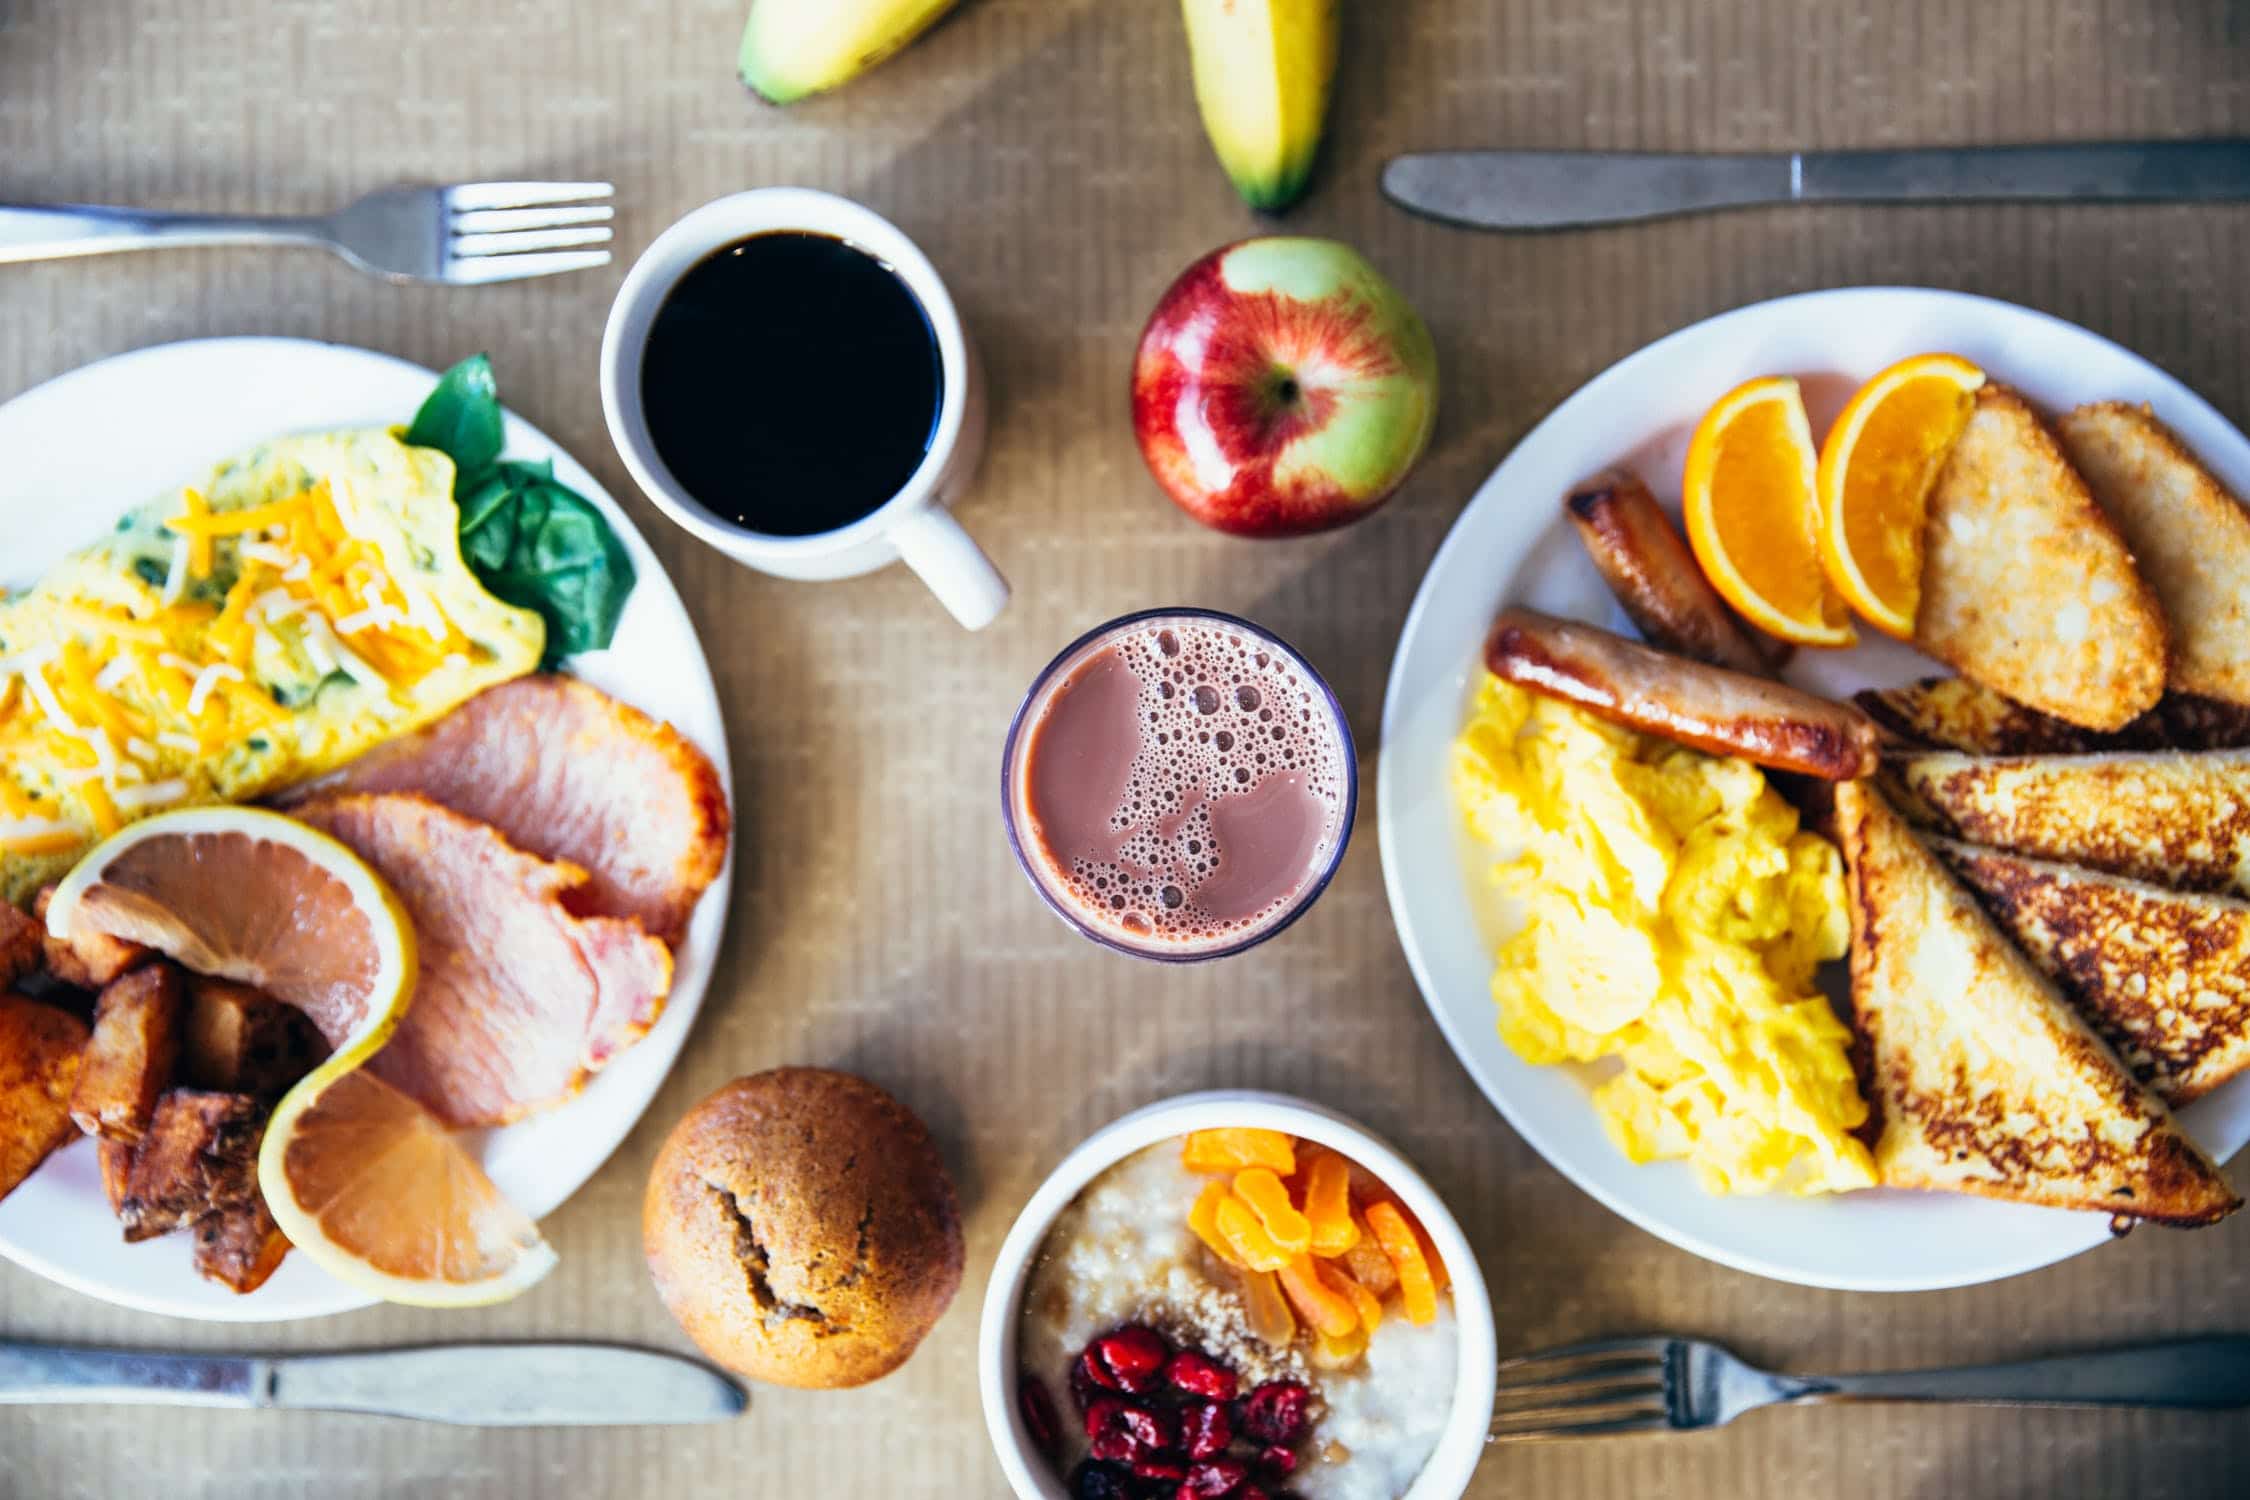 What to Eat on a Keto Diet for Breakfast